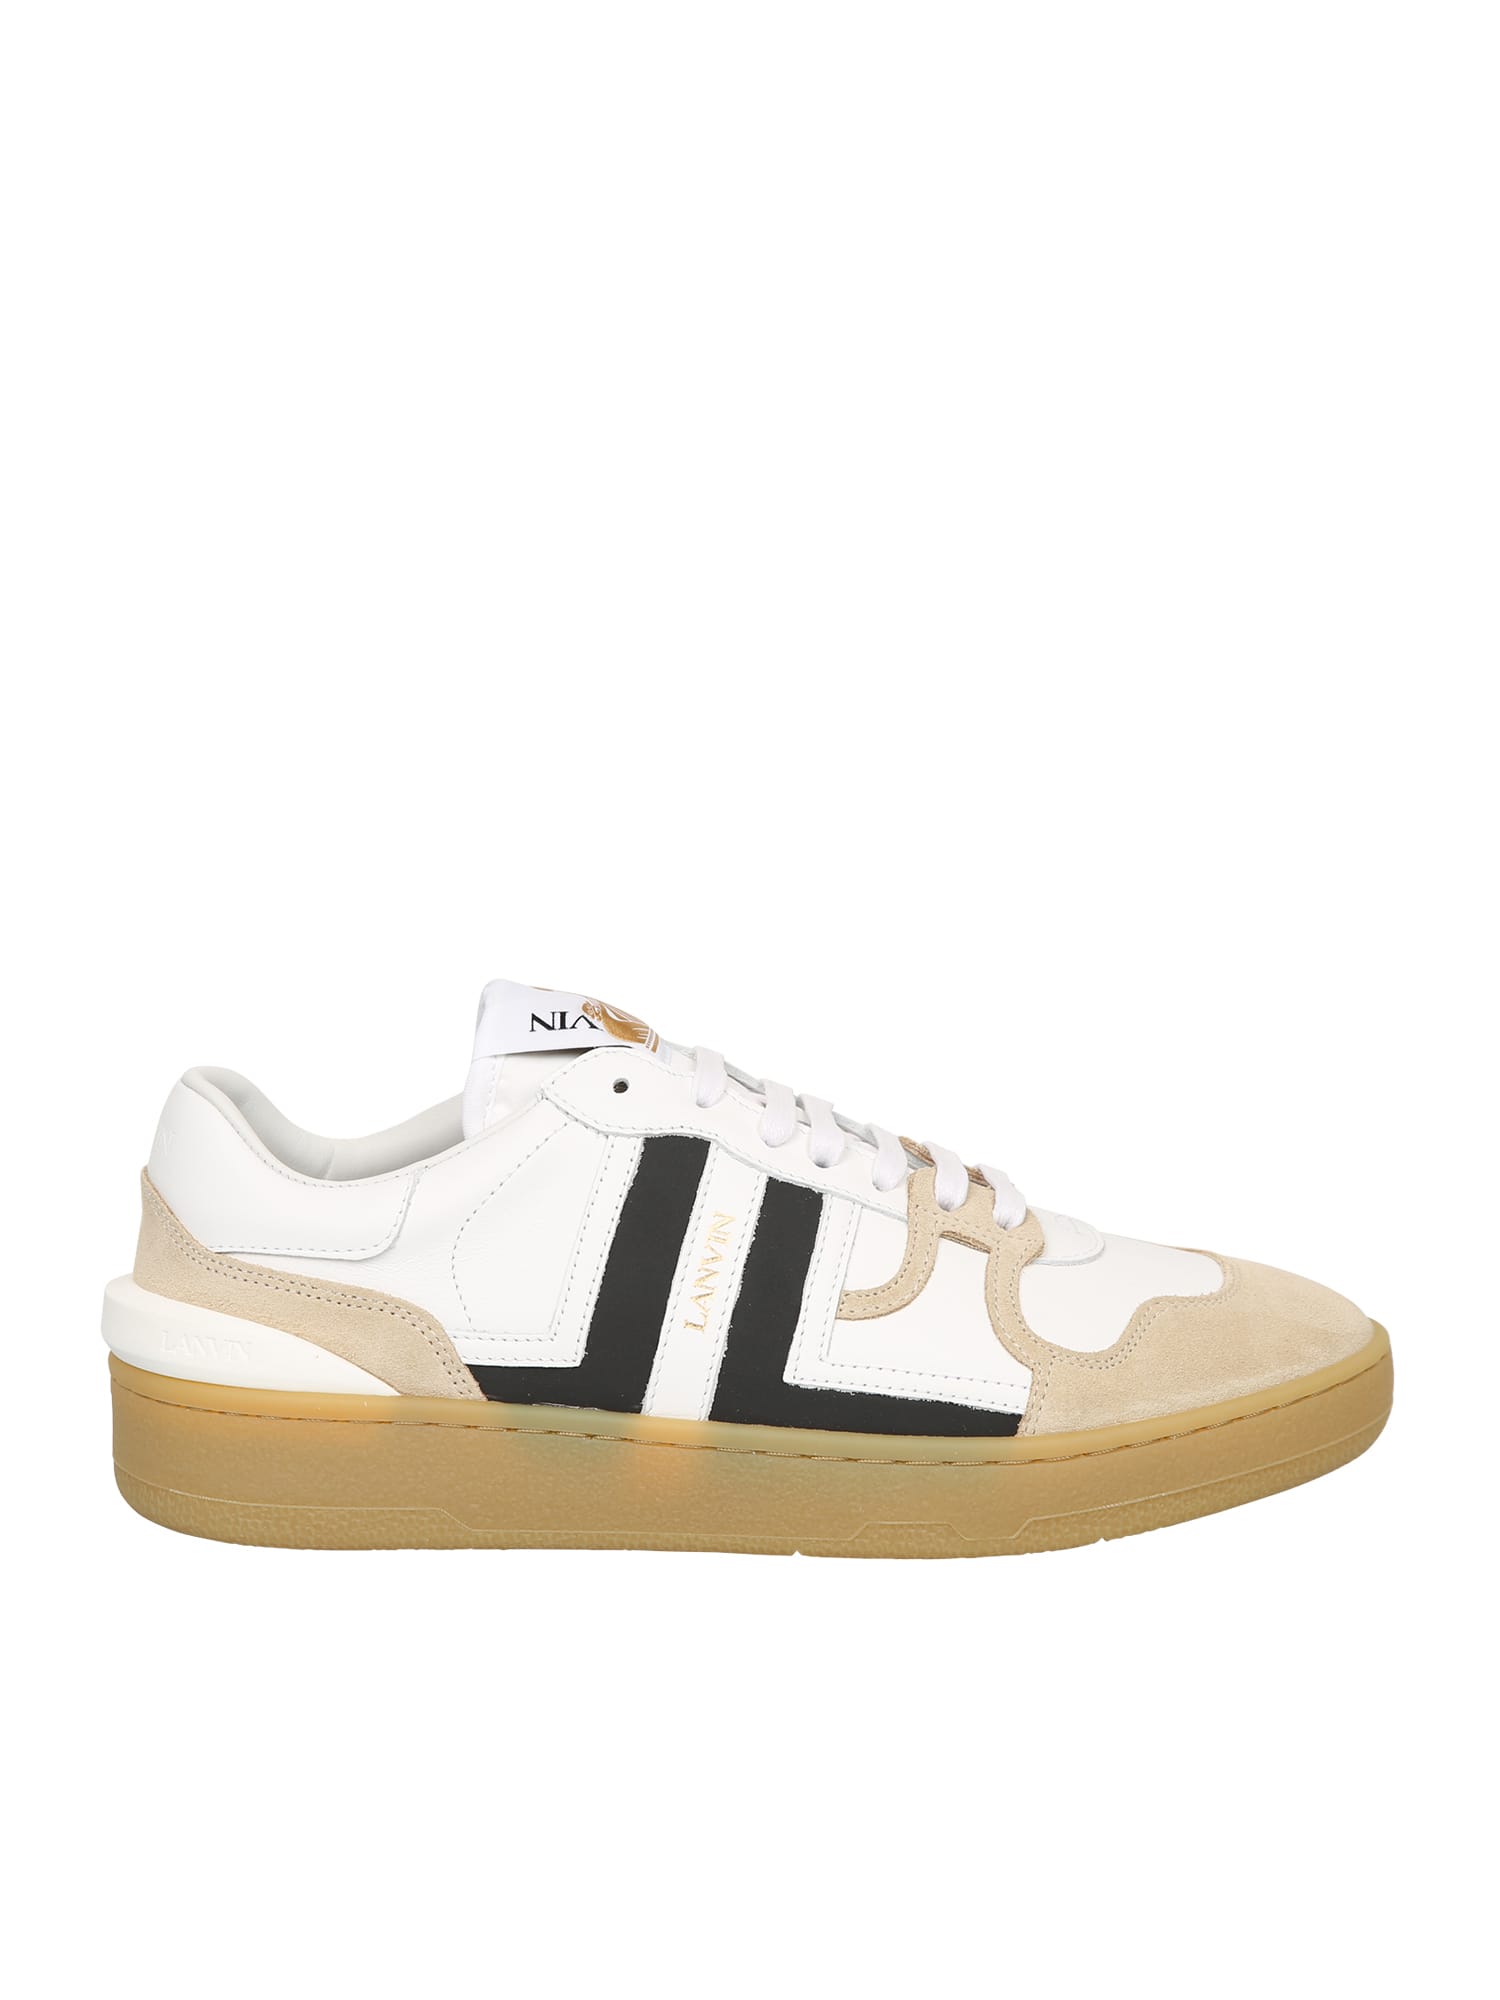 Lanvin Sneakers Low Top Clay Bia/nero